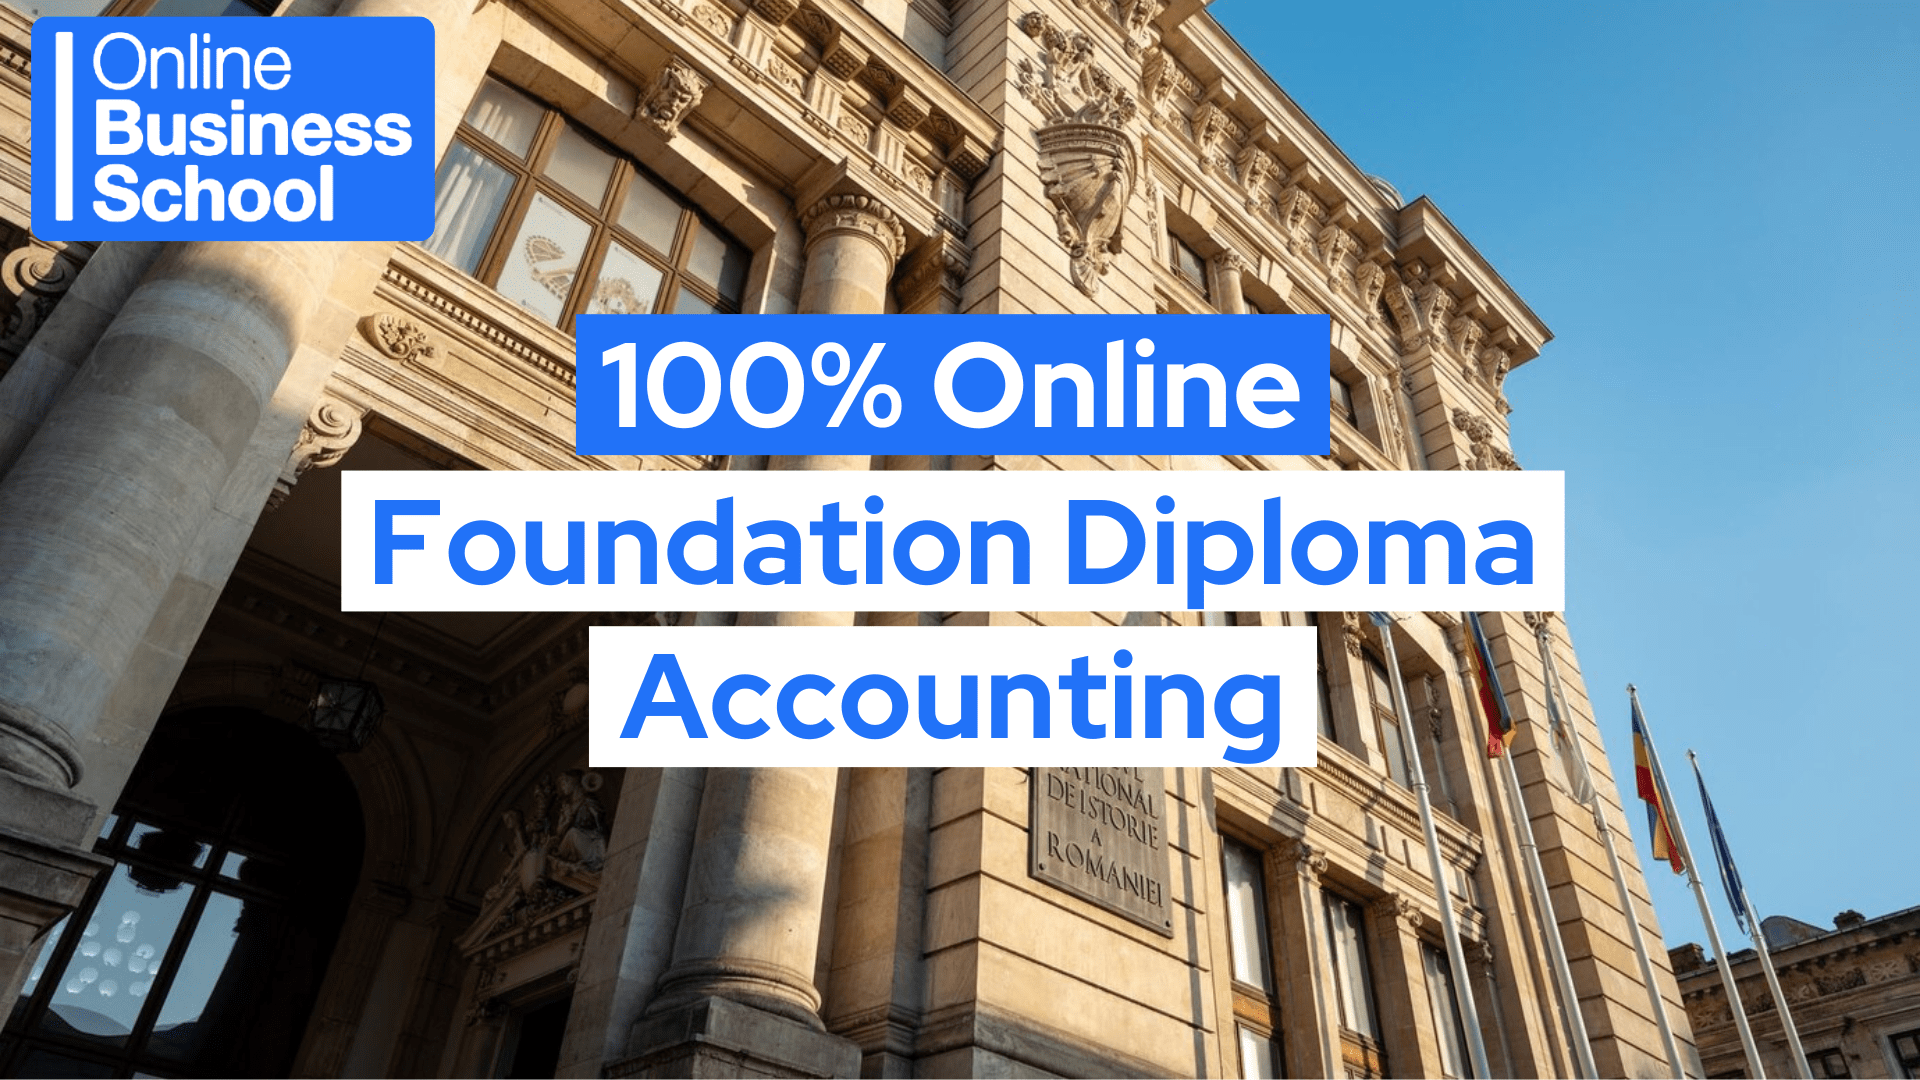 MQF Level 4 diploma in accounting course is fully flexible and self-paced. Among the most flexible and affordable accounting courses in Malta.